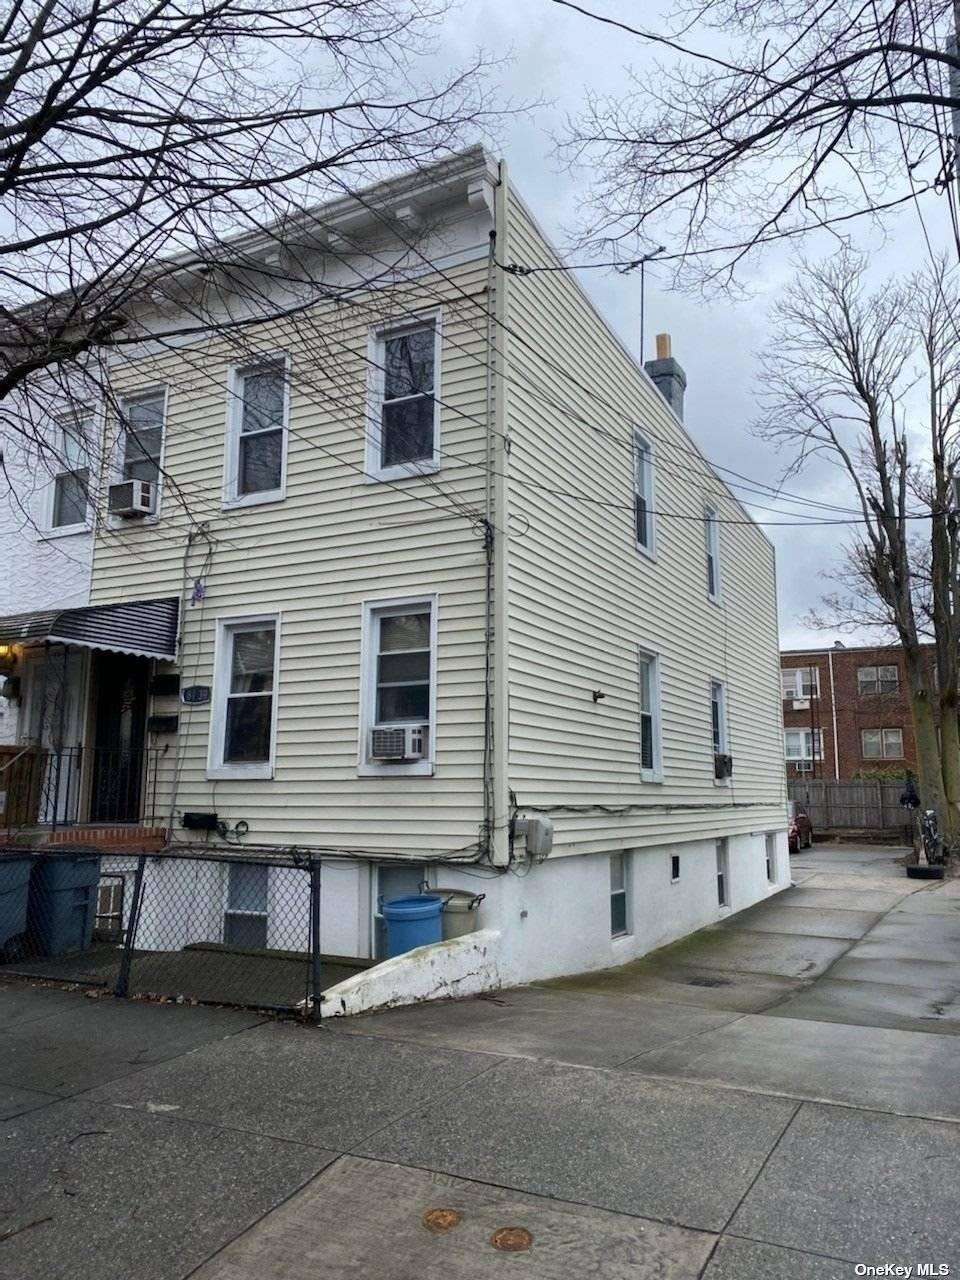 Ozone Park ; 3 Family ; 5 Bedrooms ; 3 Baths ; 3 Kitchens ; Private Driveway ; 4 Private Rear Parking Spot ; Gas Heat ; New Water Heater ...